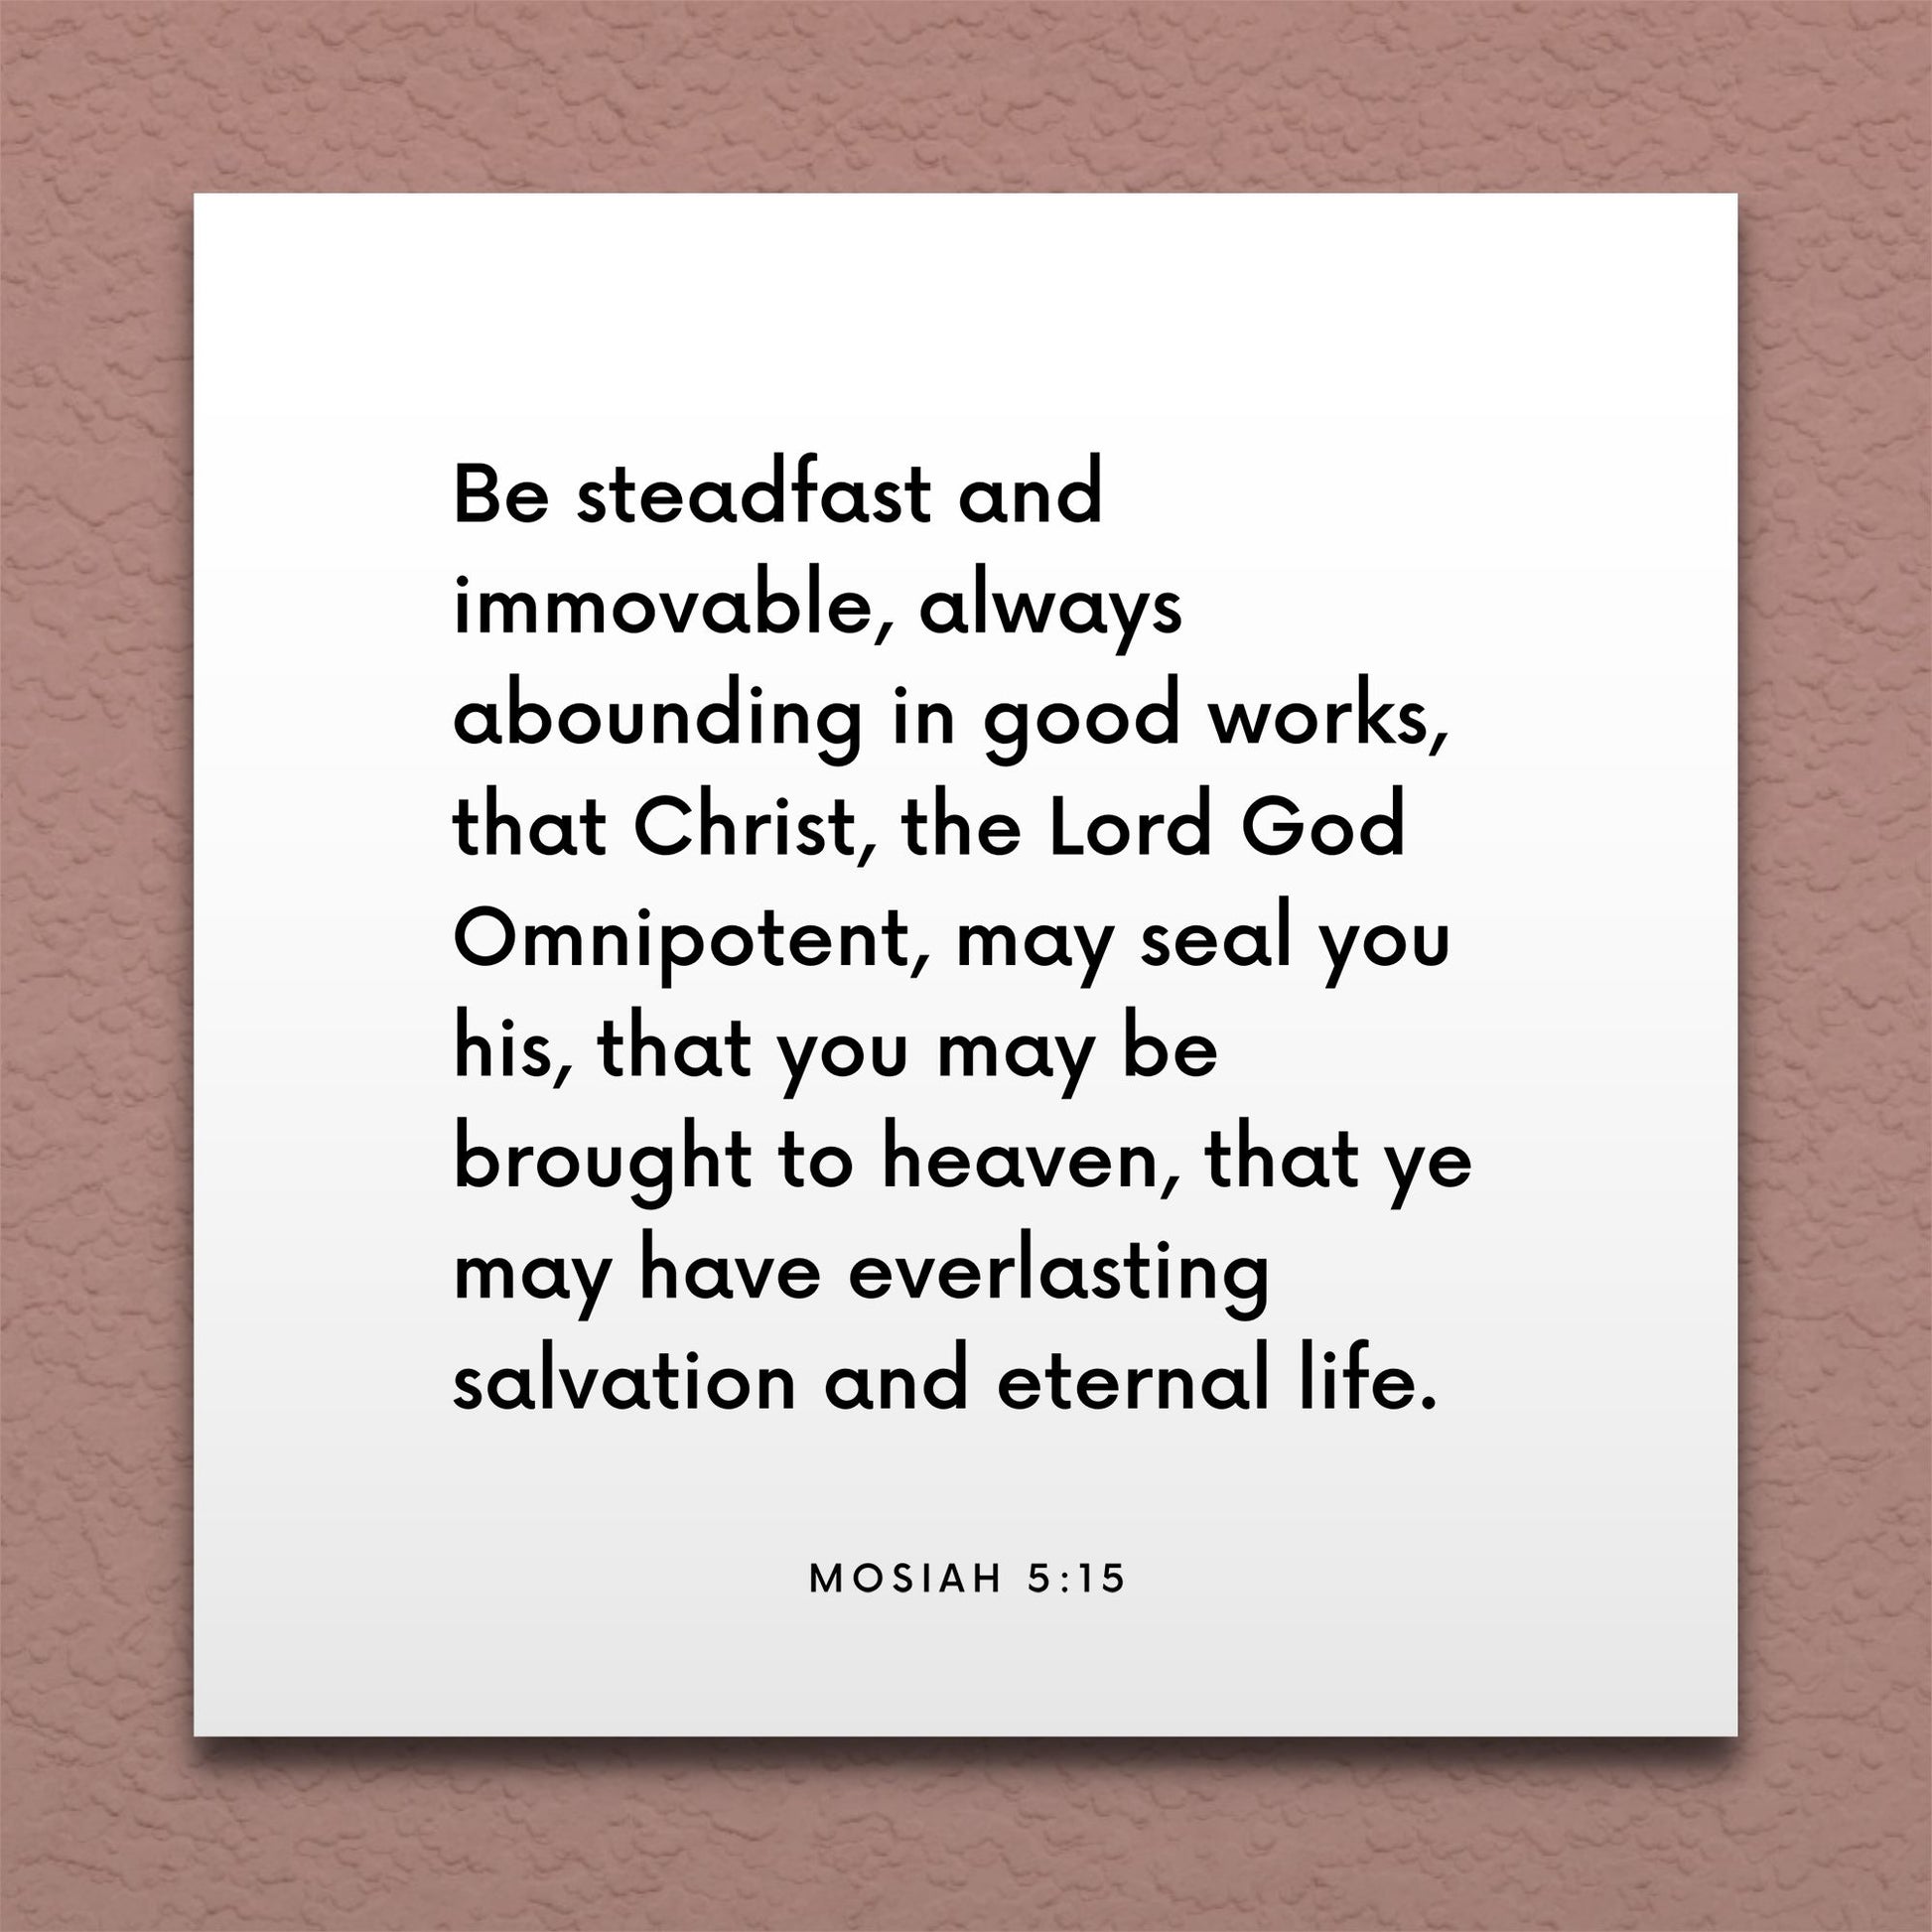 Wall-mounted scripture tile for Mosiah 5:15 - "Be steadfast and immovable, always abounding in good works"